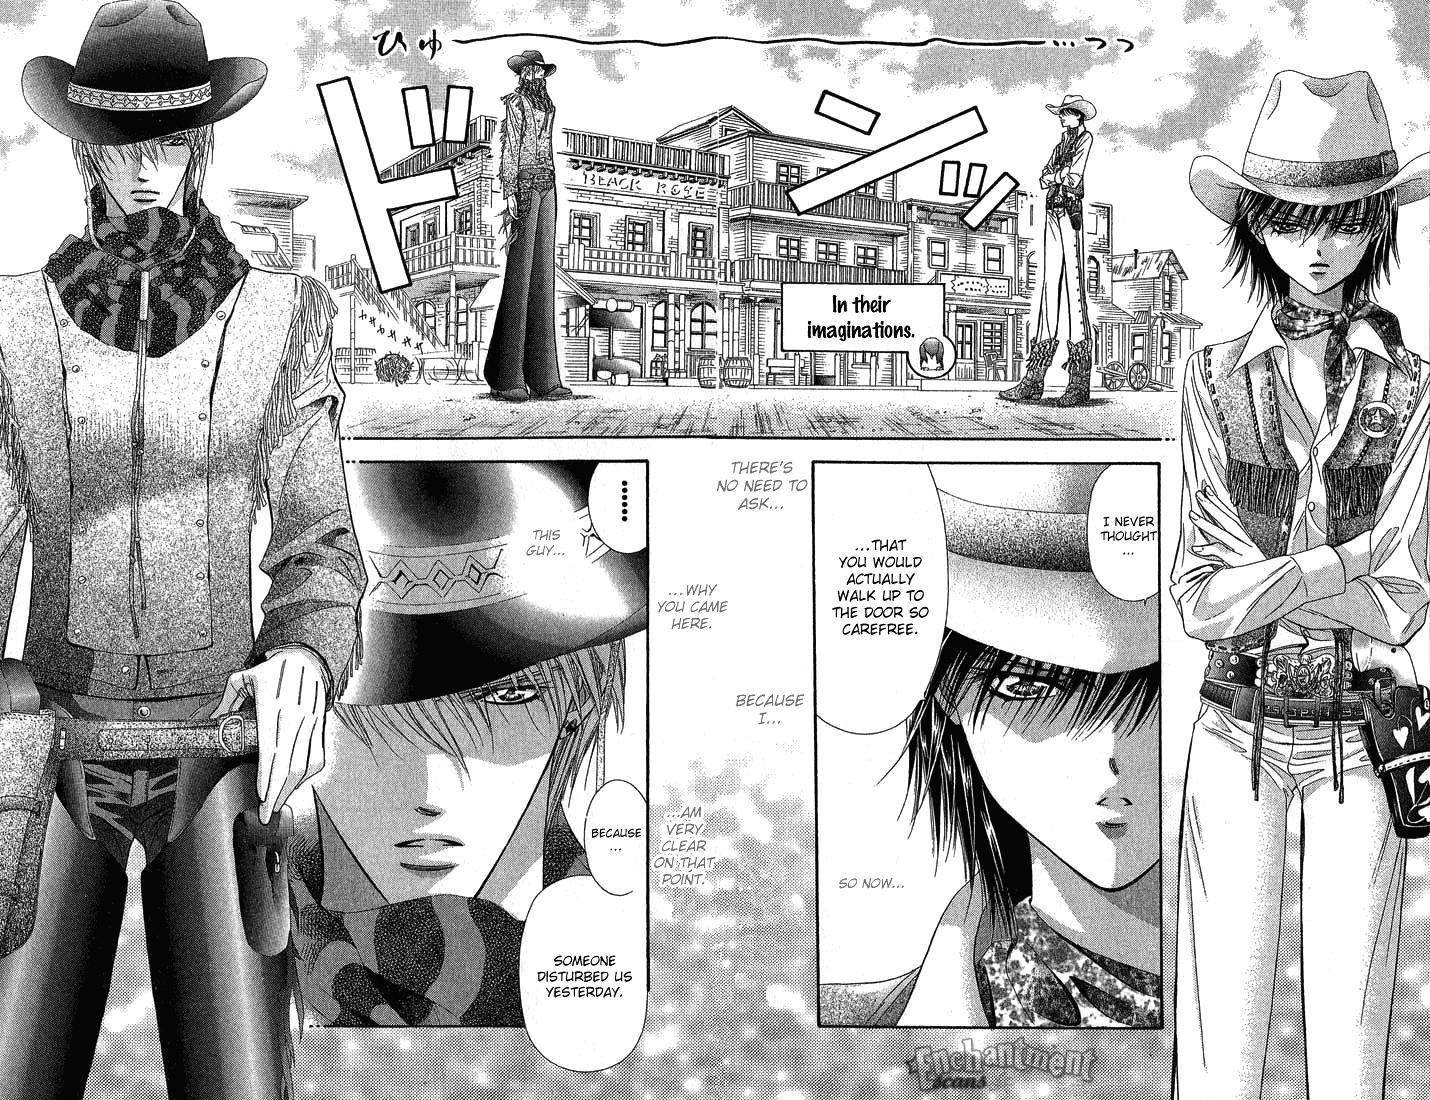 Skip Beat!, Chapter 82 Suddenly, a Love Story- Section A, Part 3 image 07